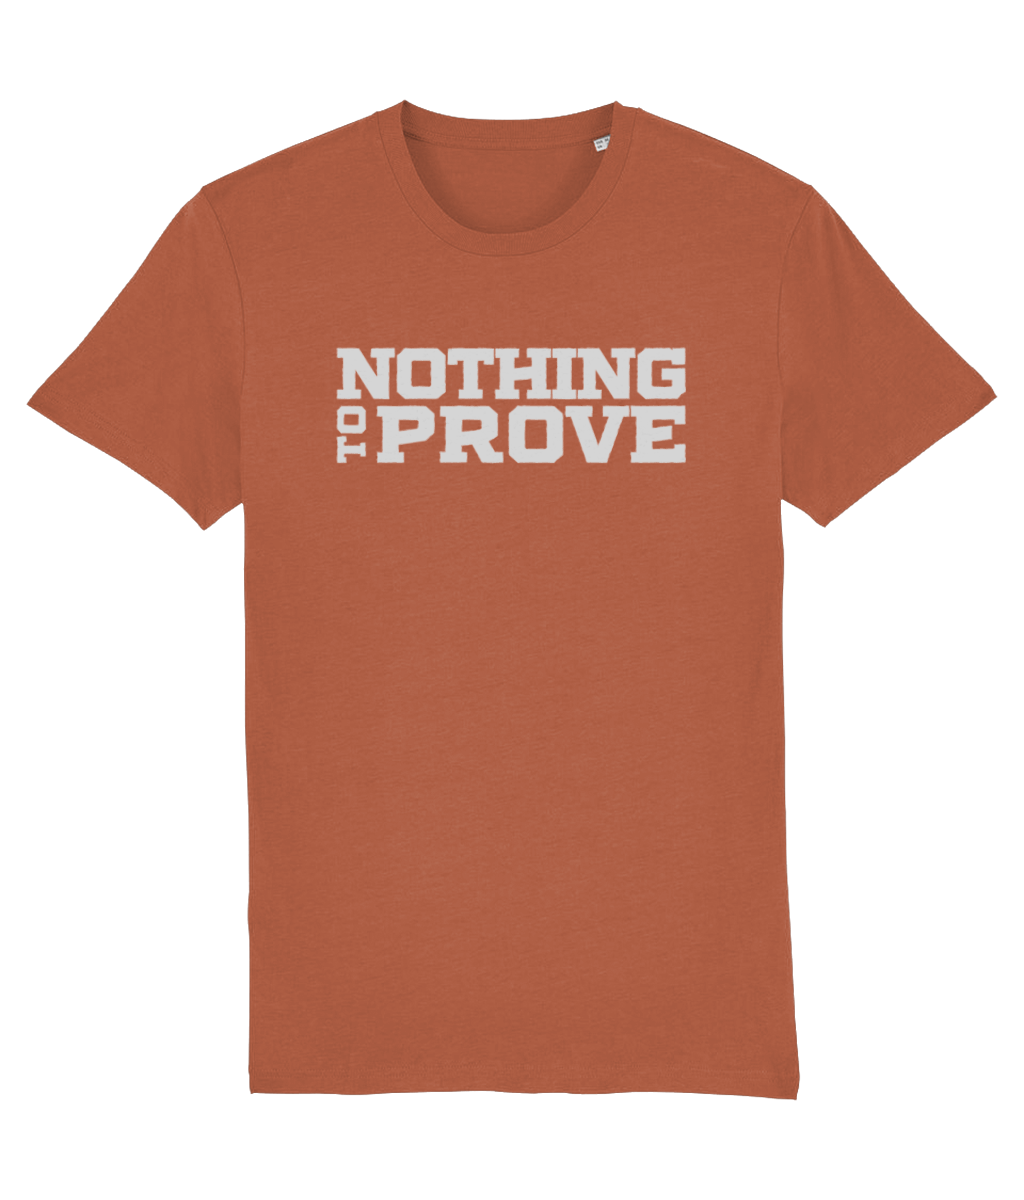 Orange variant of the Nothing to Prove T-Shirt